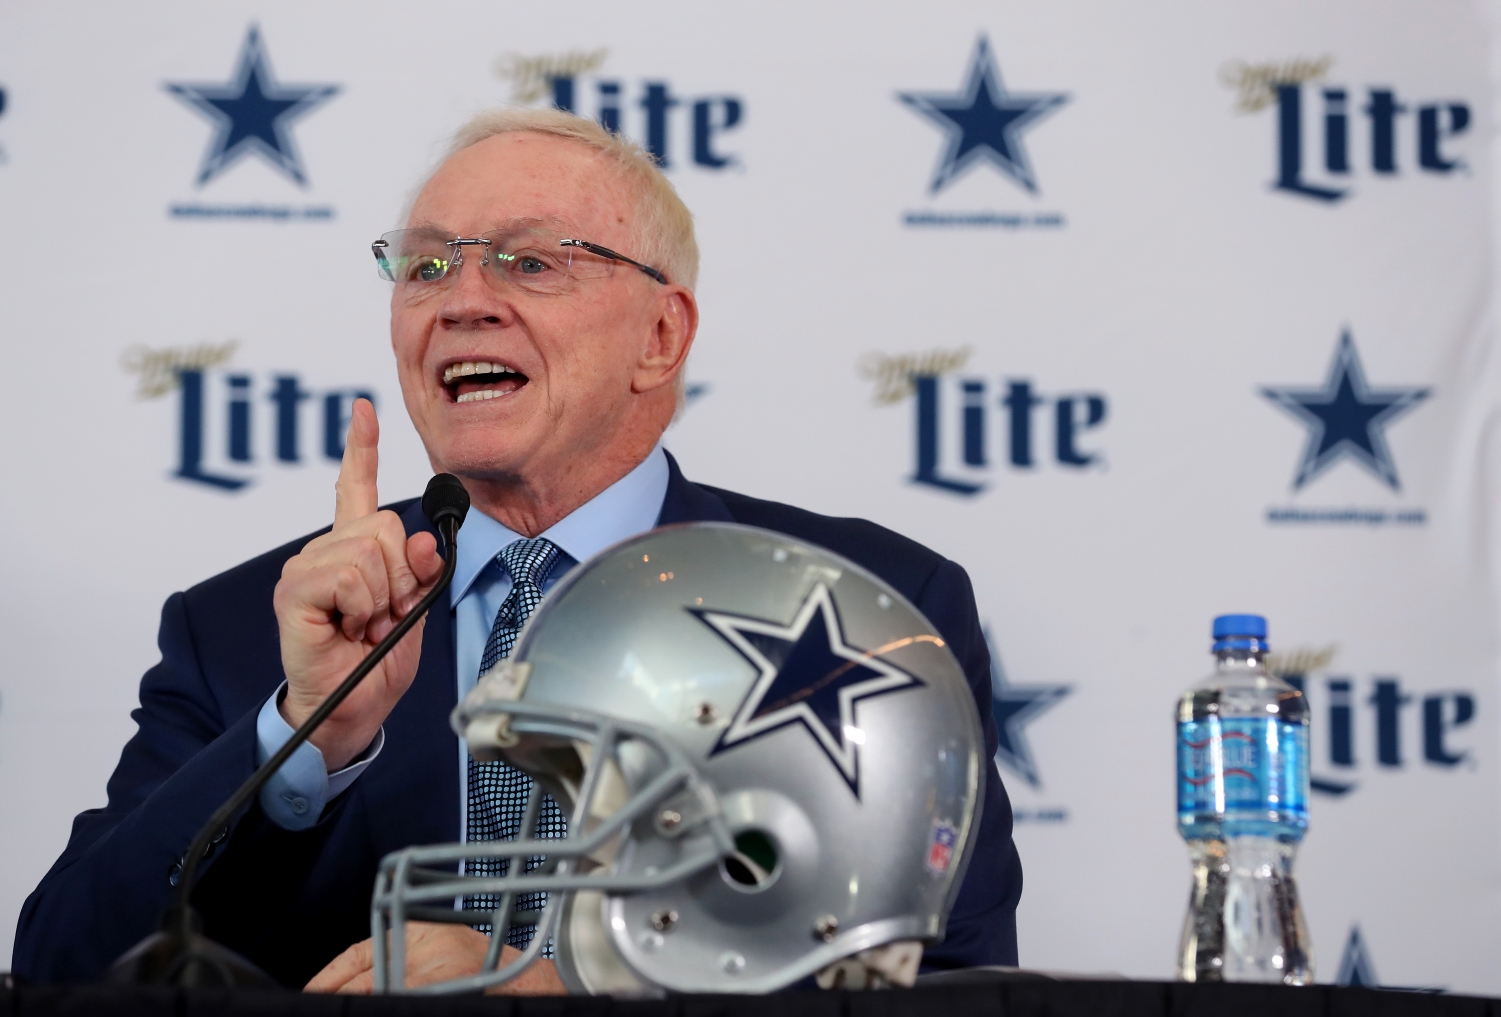 Dallas Cowboys owner Jerry Jones speaks at a press conference.